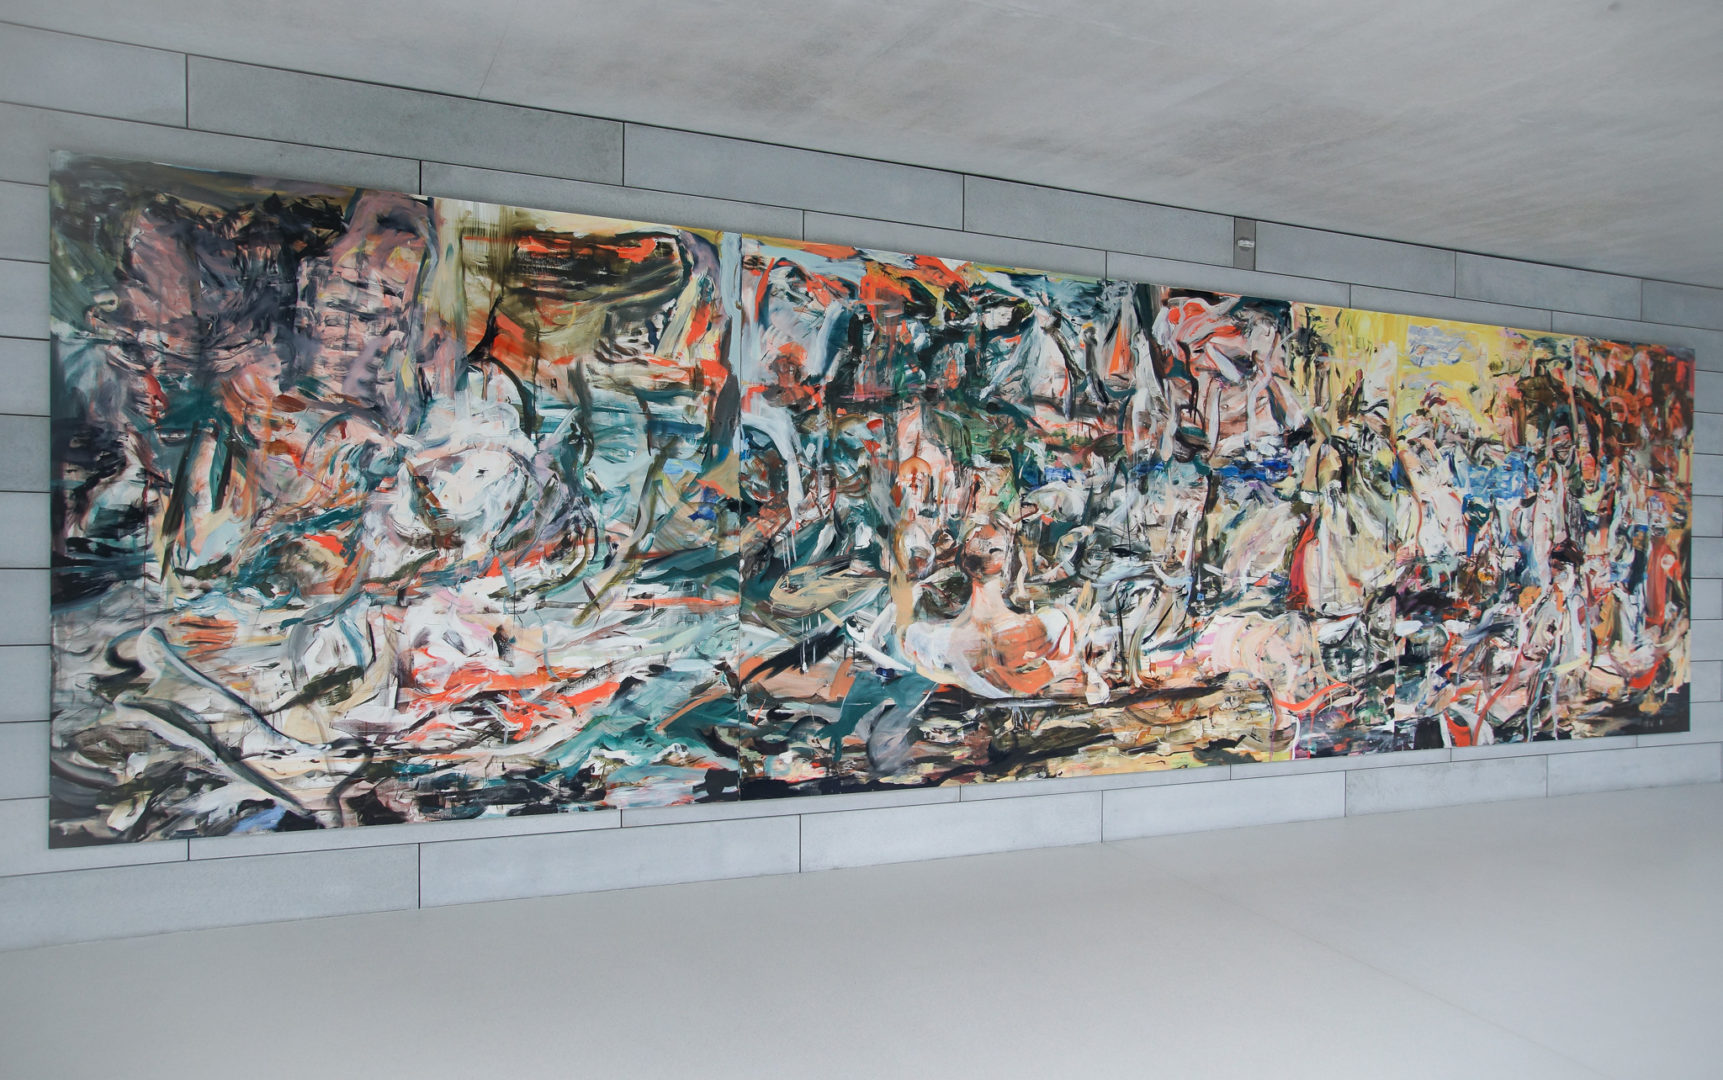 A large and colorful abstract painting hangs on a concrete wall.